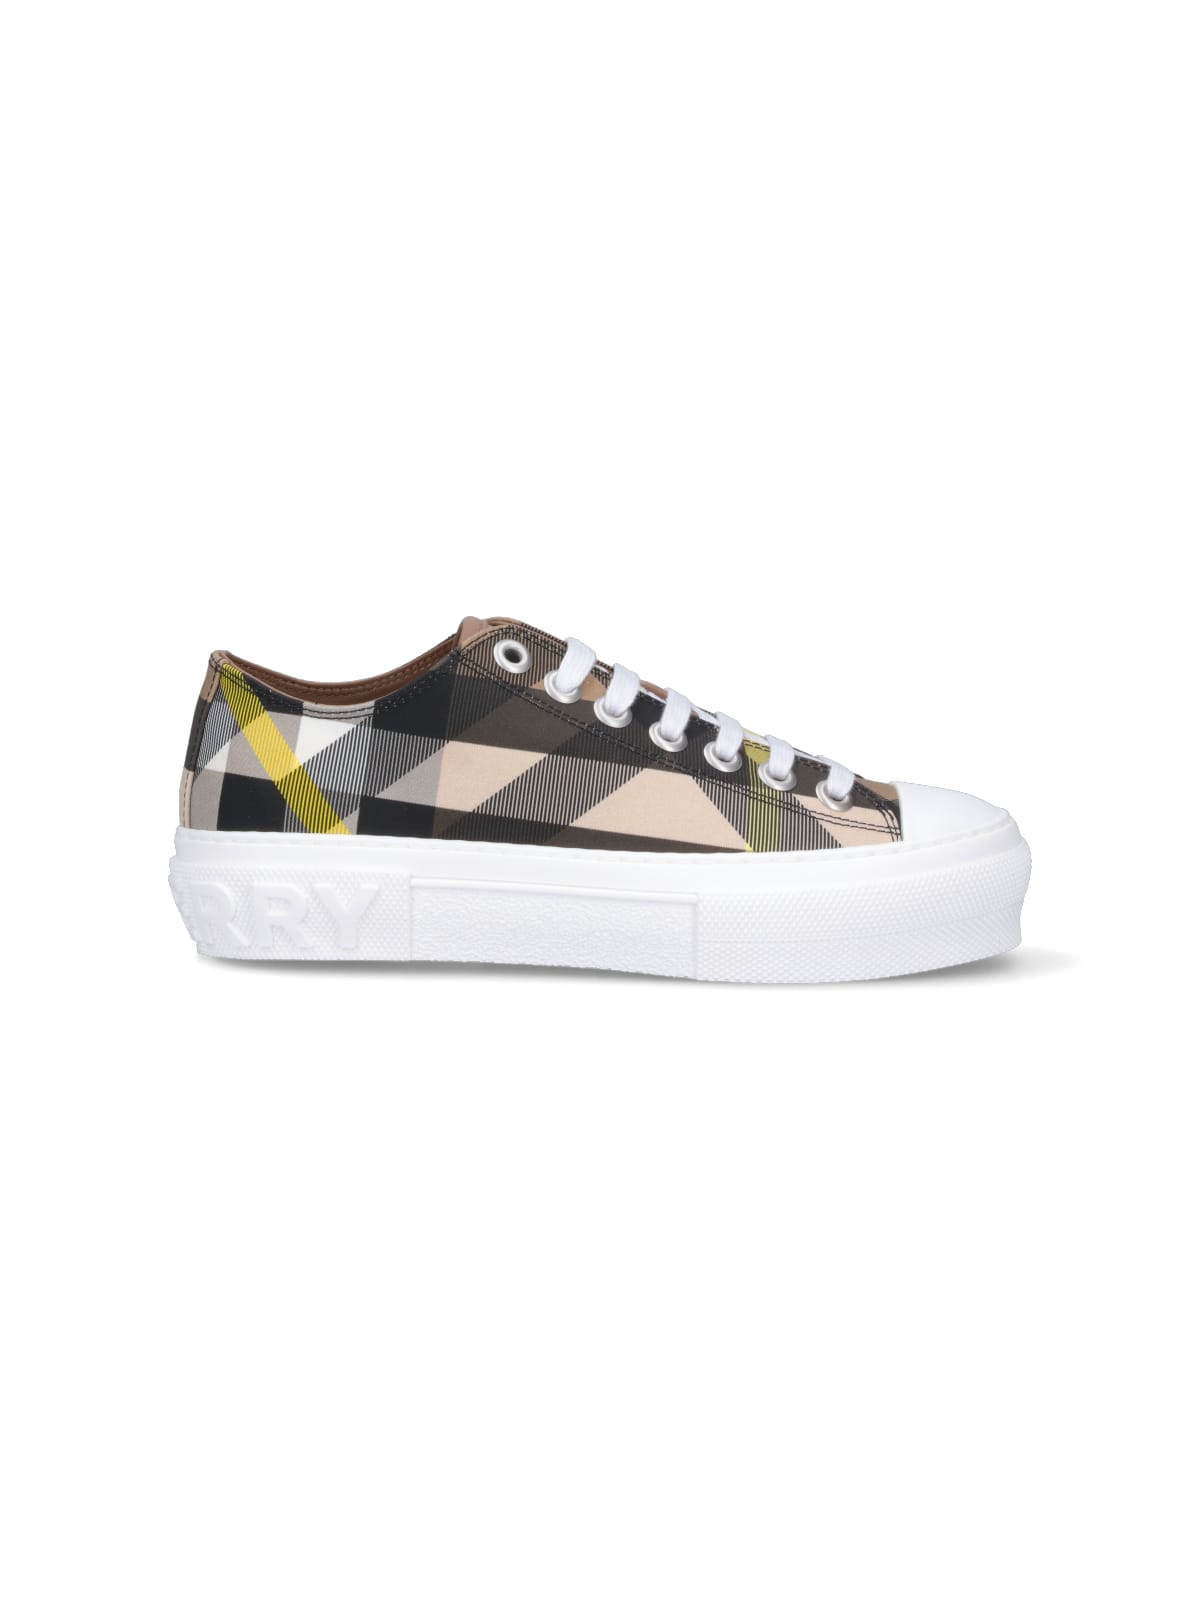 Burberry Cotton Sneakers